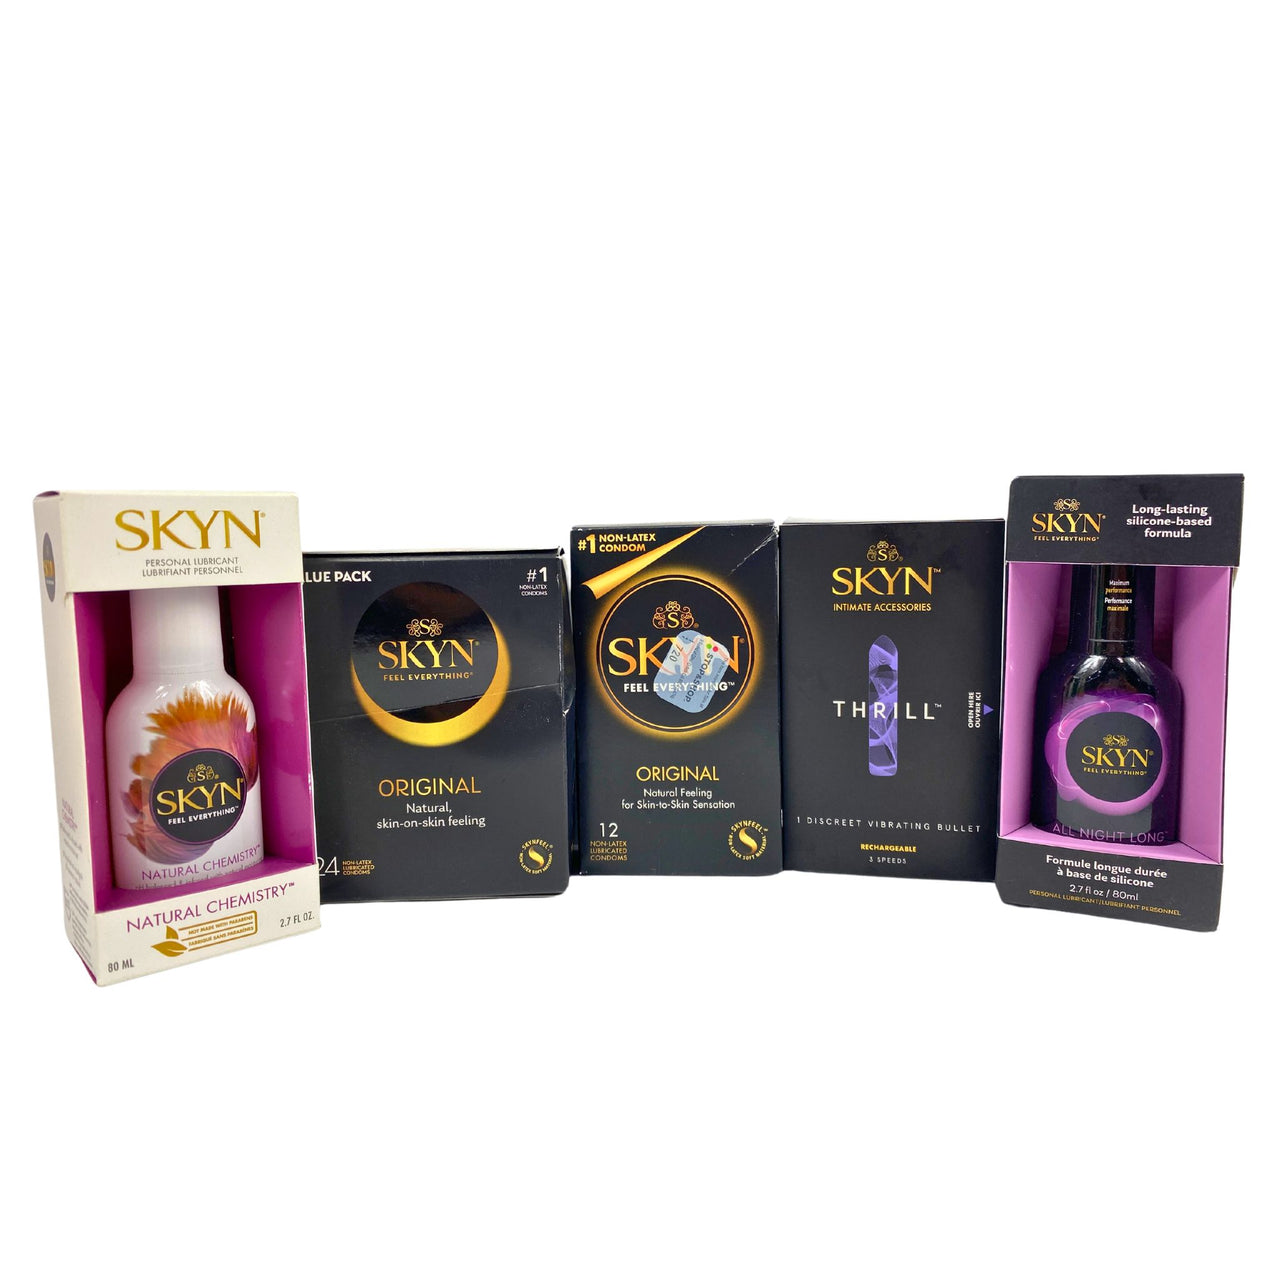 Skyn Assorted Mix includes Lubricant , Condoms & Discreet Vibrating Bullet